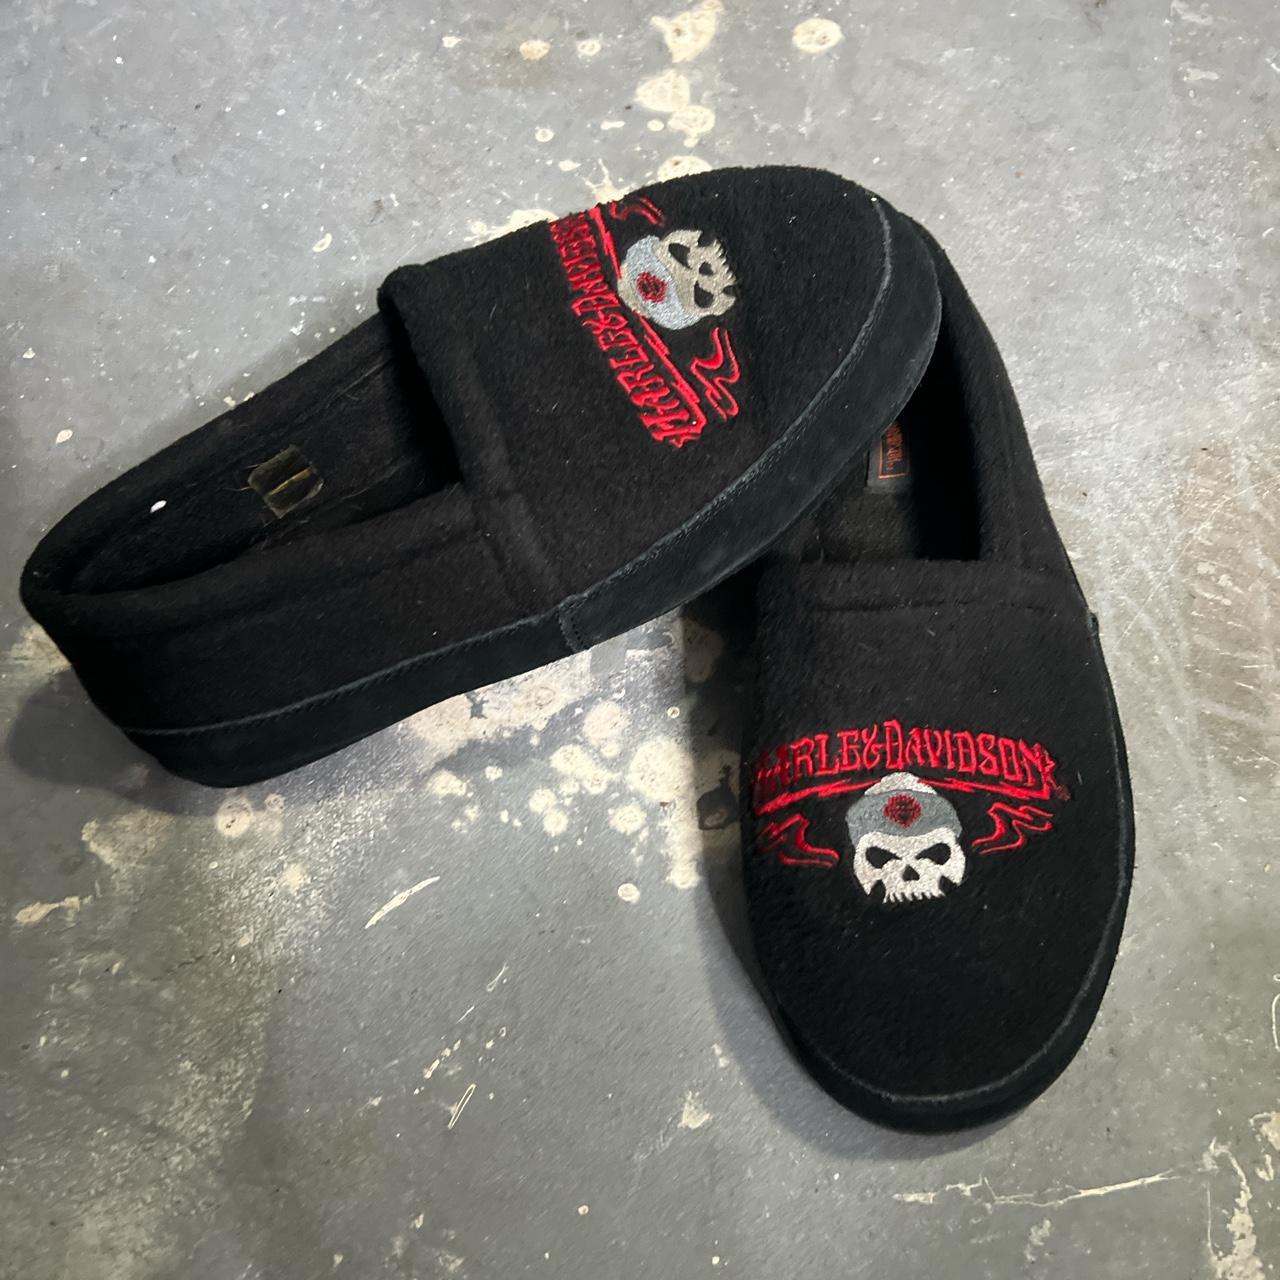 Men's and Women's slippers are... - CinCity Harley-Davidson | Facebook